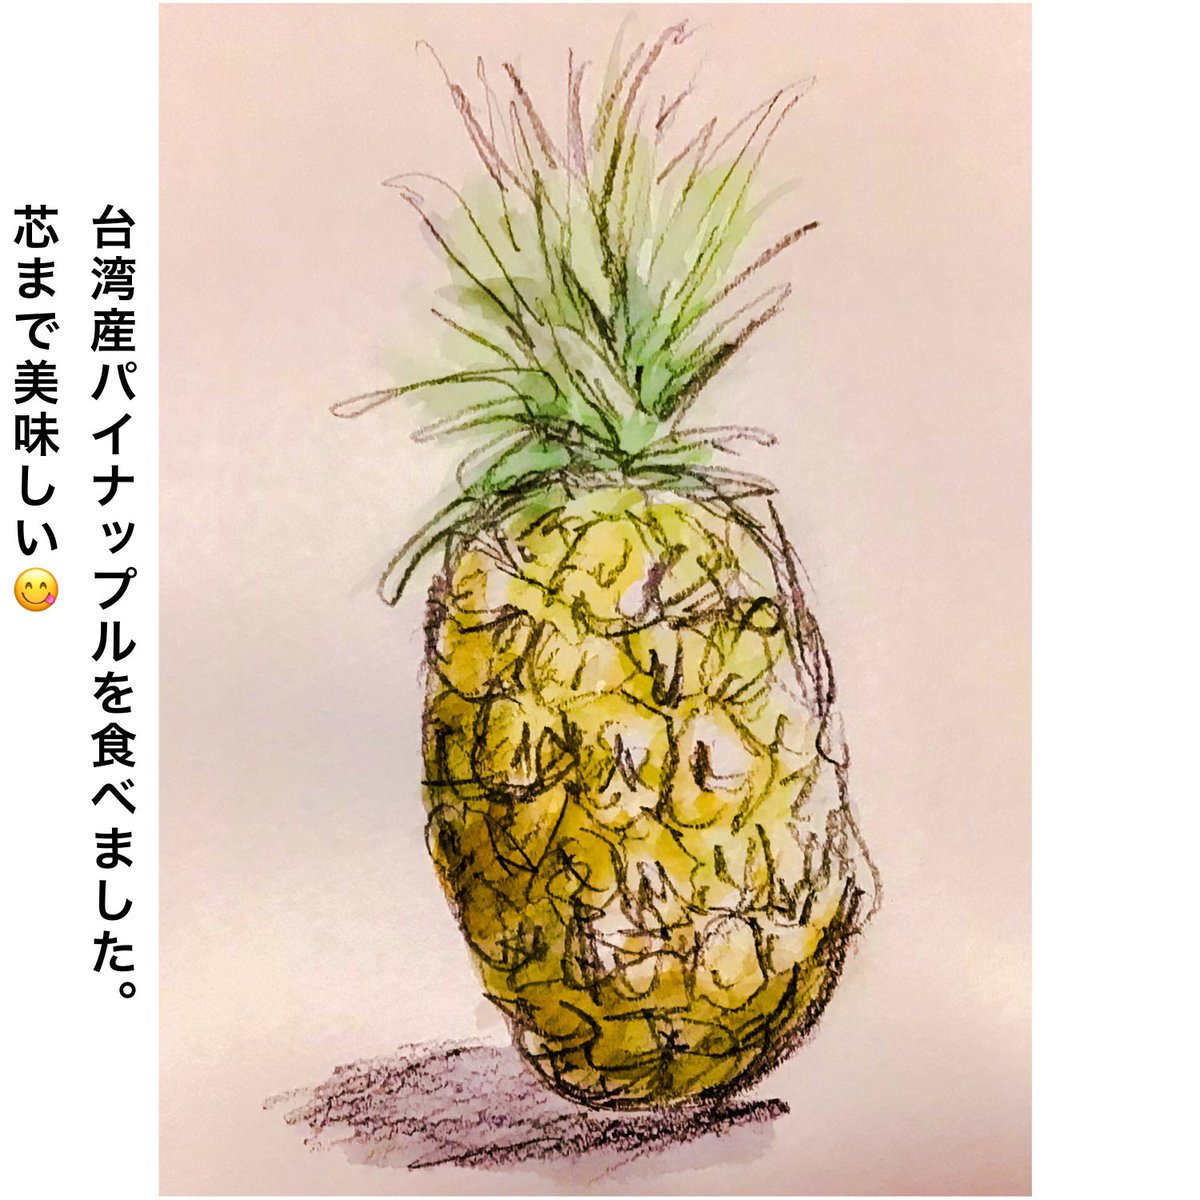 I had some Taiwanese pineapple.

#Picturediary 
#絵日記